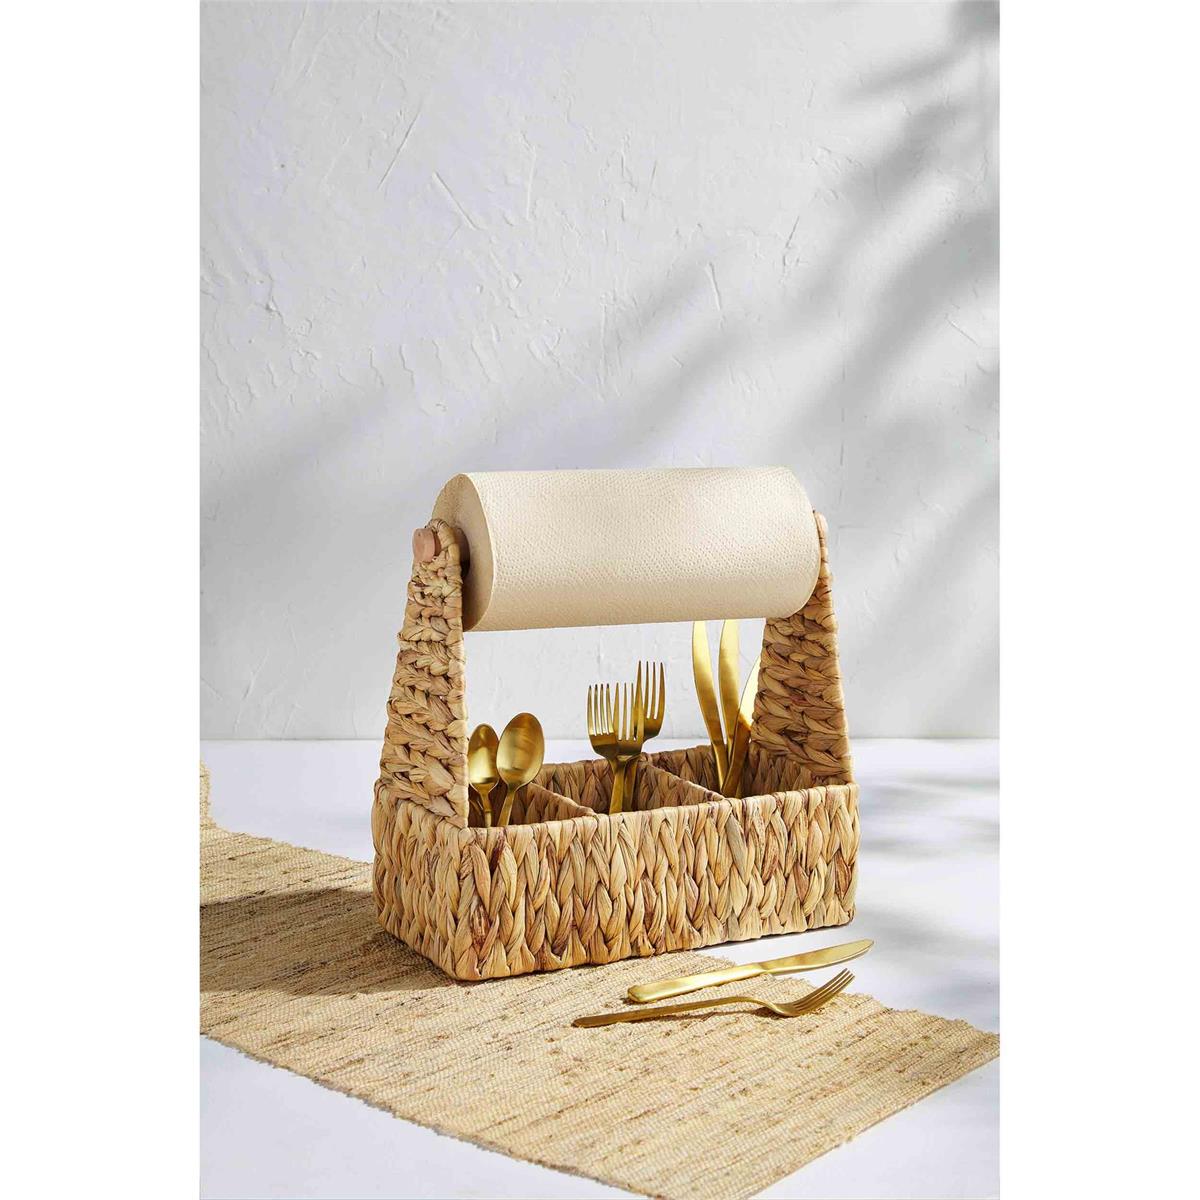 woven utensil and towel caddy displayed with gold flatware inside on a white surface next to a tan table runner